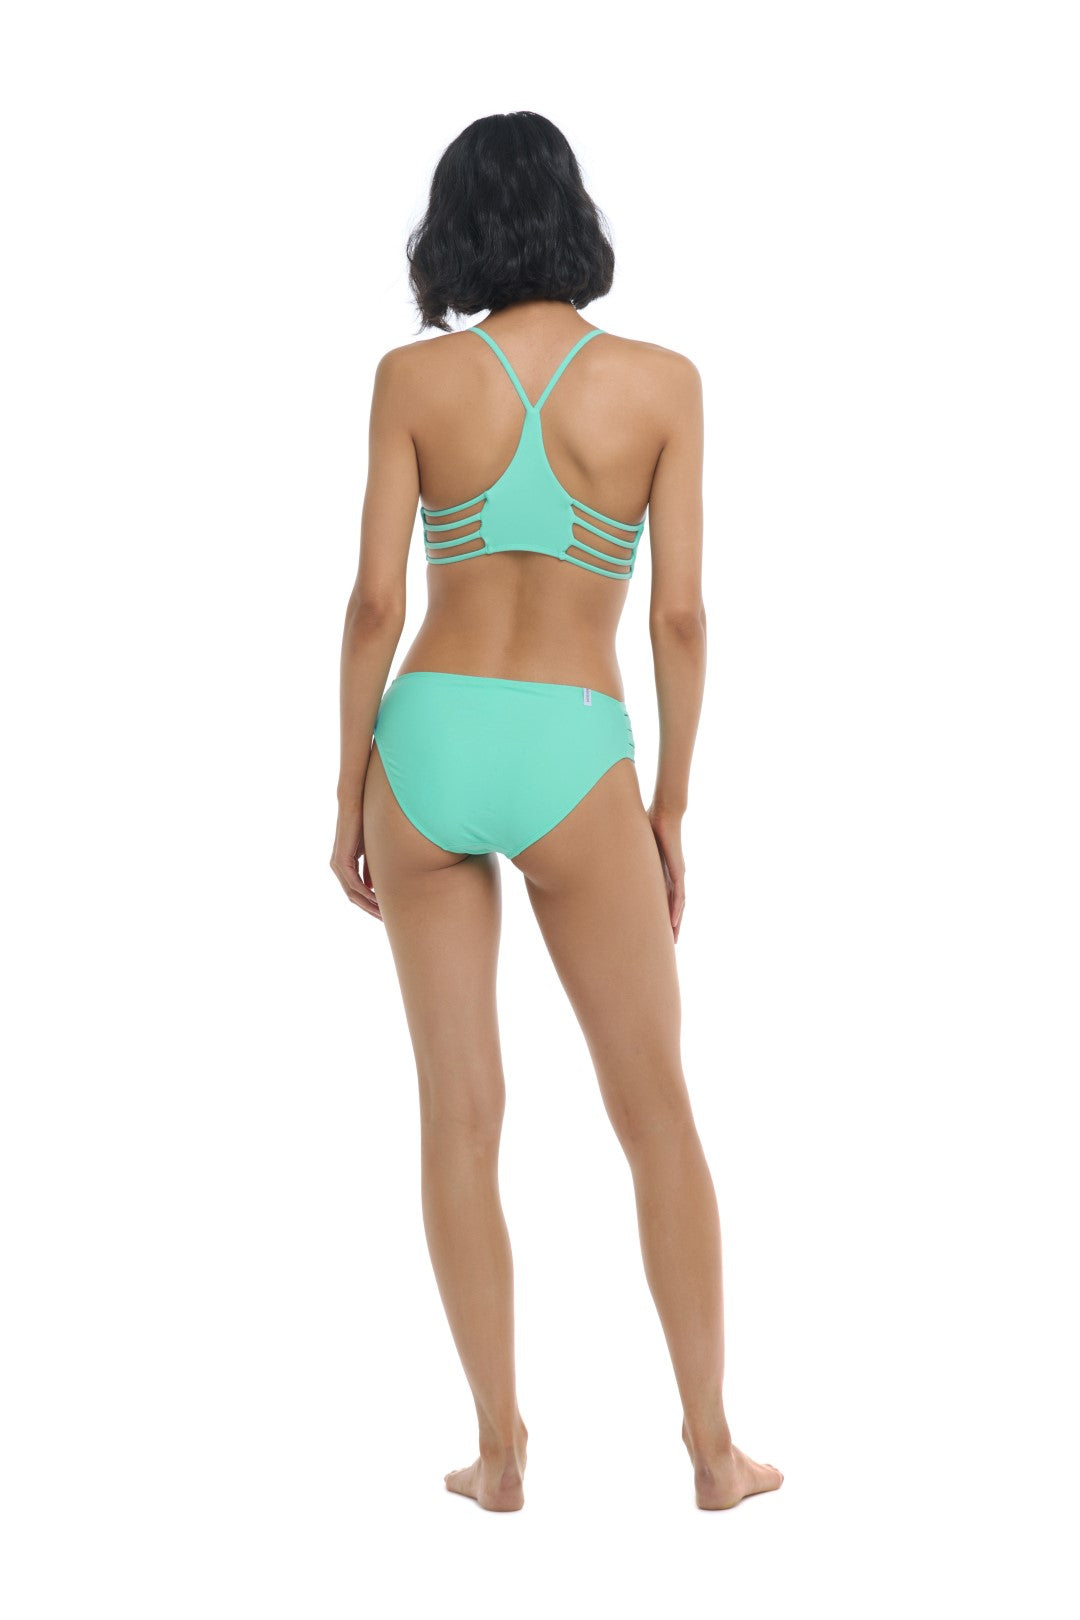 Alani Body Glove Top in Turquoise color